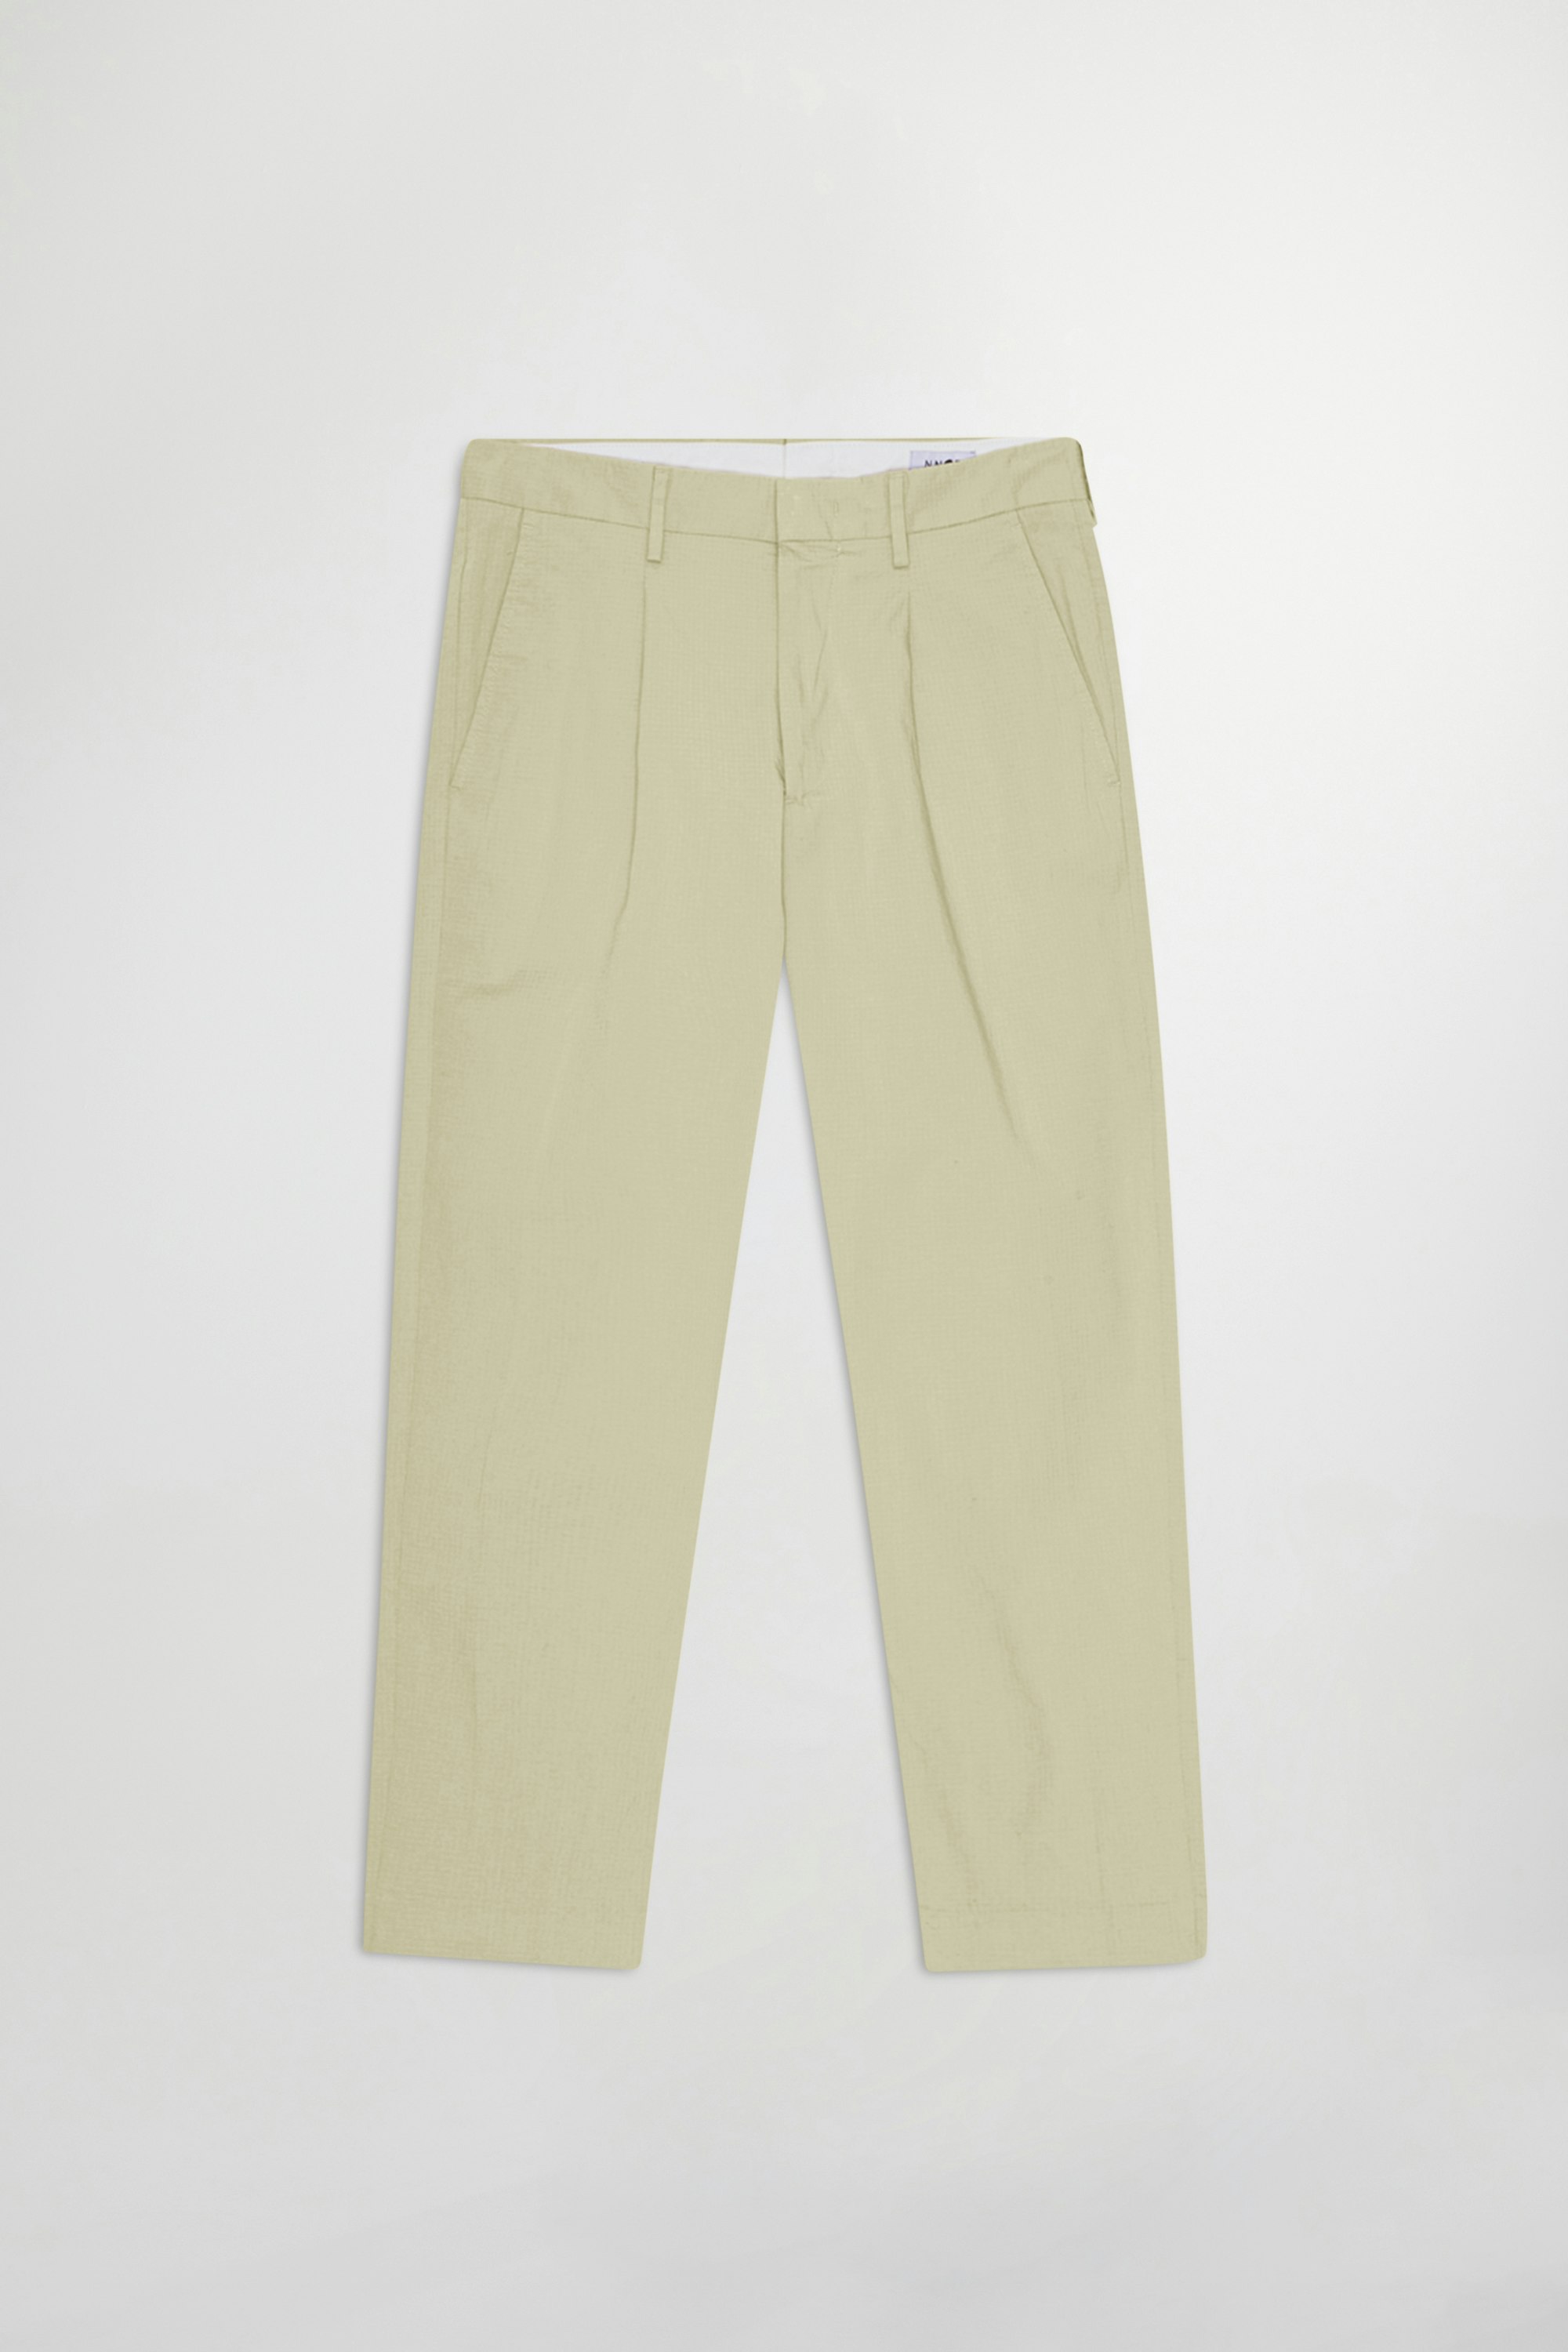 Good Neighbour  NO NATIONALITY 07 Bill 1449 Ripstop Trousers (Pale Green)